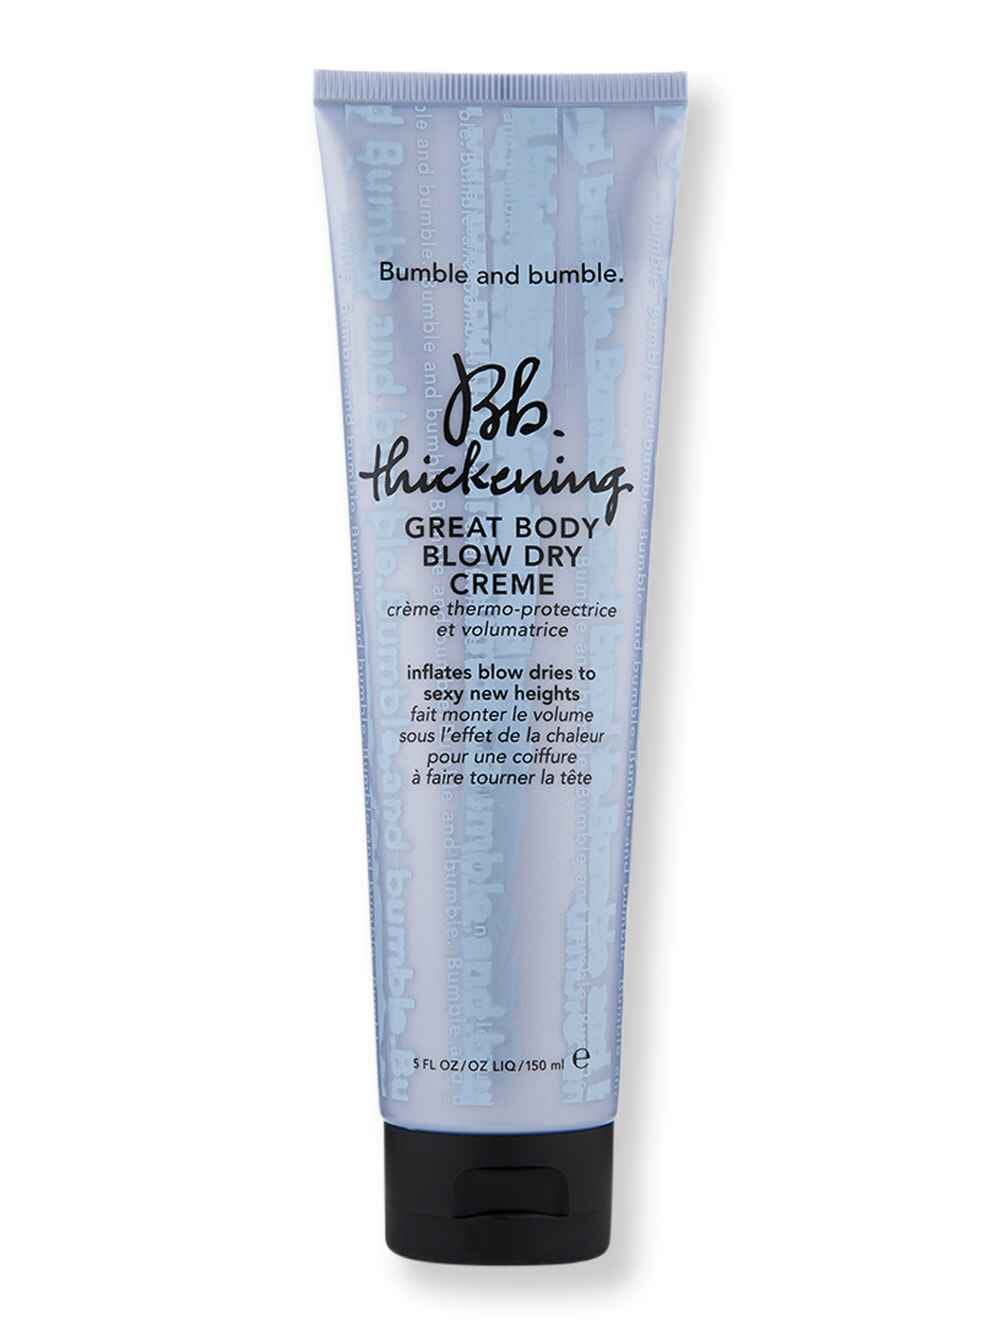 Bumble and bumble Bumble and bumble Bb.Thickening Great Body Blow Dry Creme 5 oz Styling Treatments 